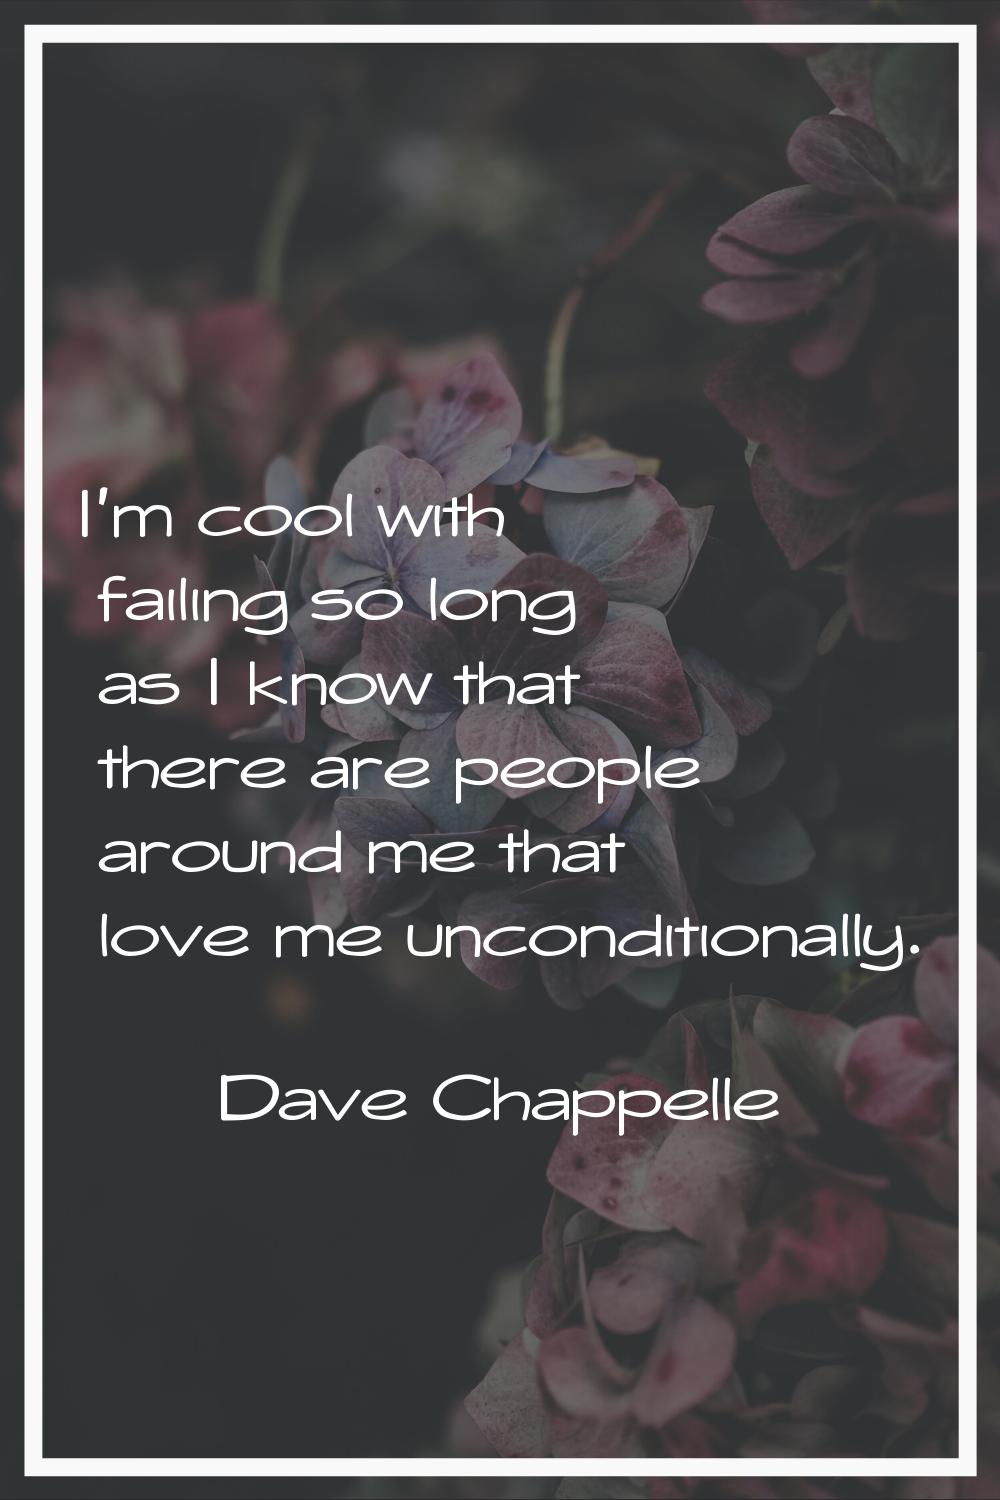 I'm cool with failing so long as I know that there are people around me that love me unconditionall